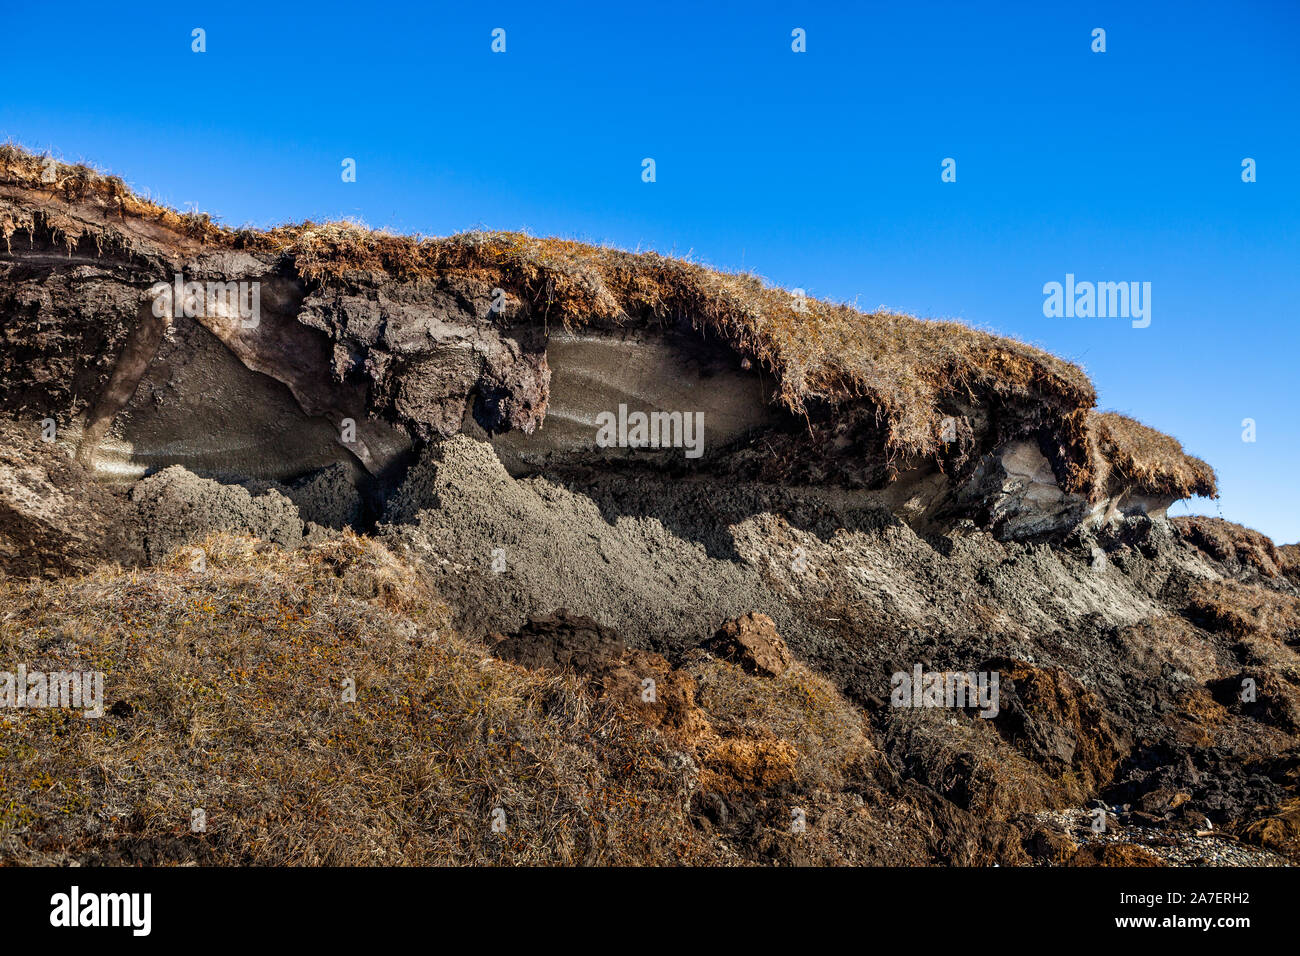 Exposed arctic permafrost at the edge of tundra cliffside as it erodes into Kotzebue Sound, in the Alaskan Arctic. Stock Photo